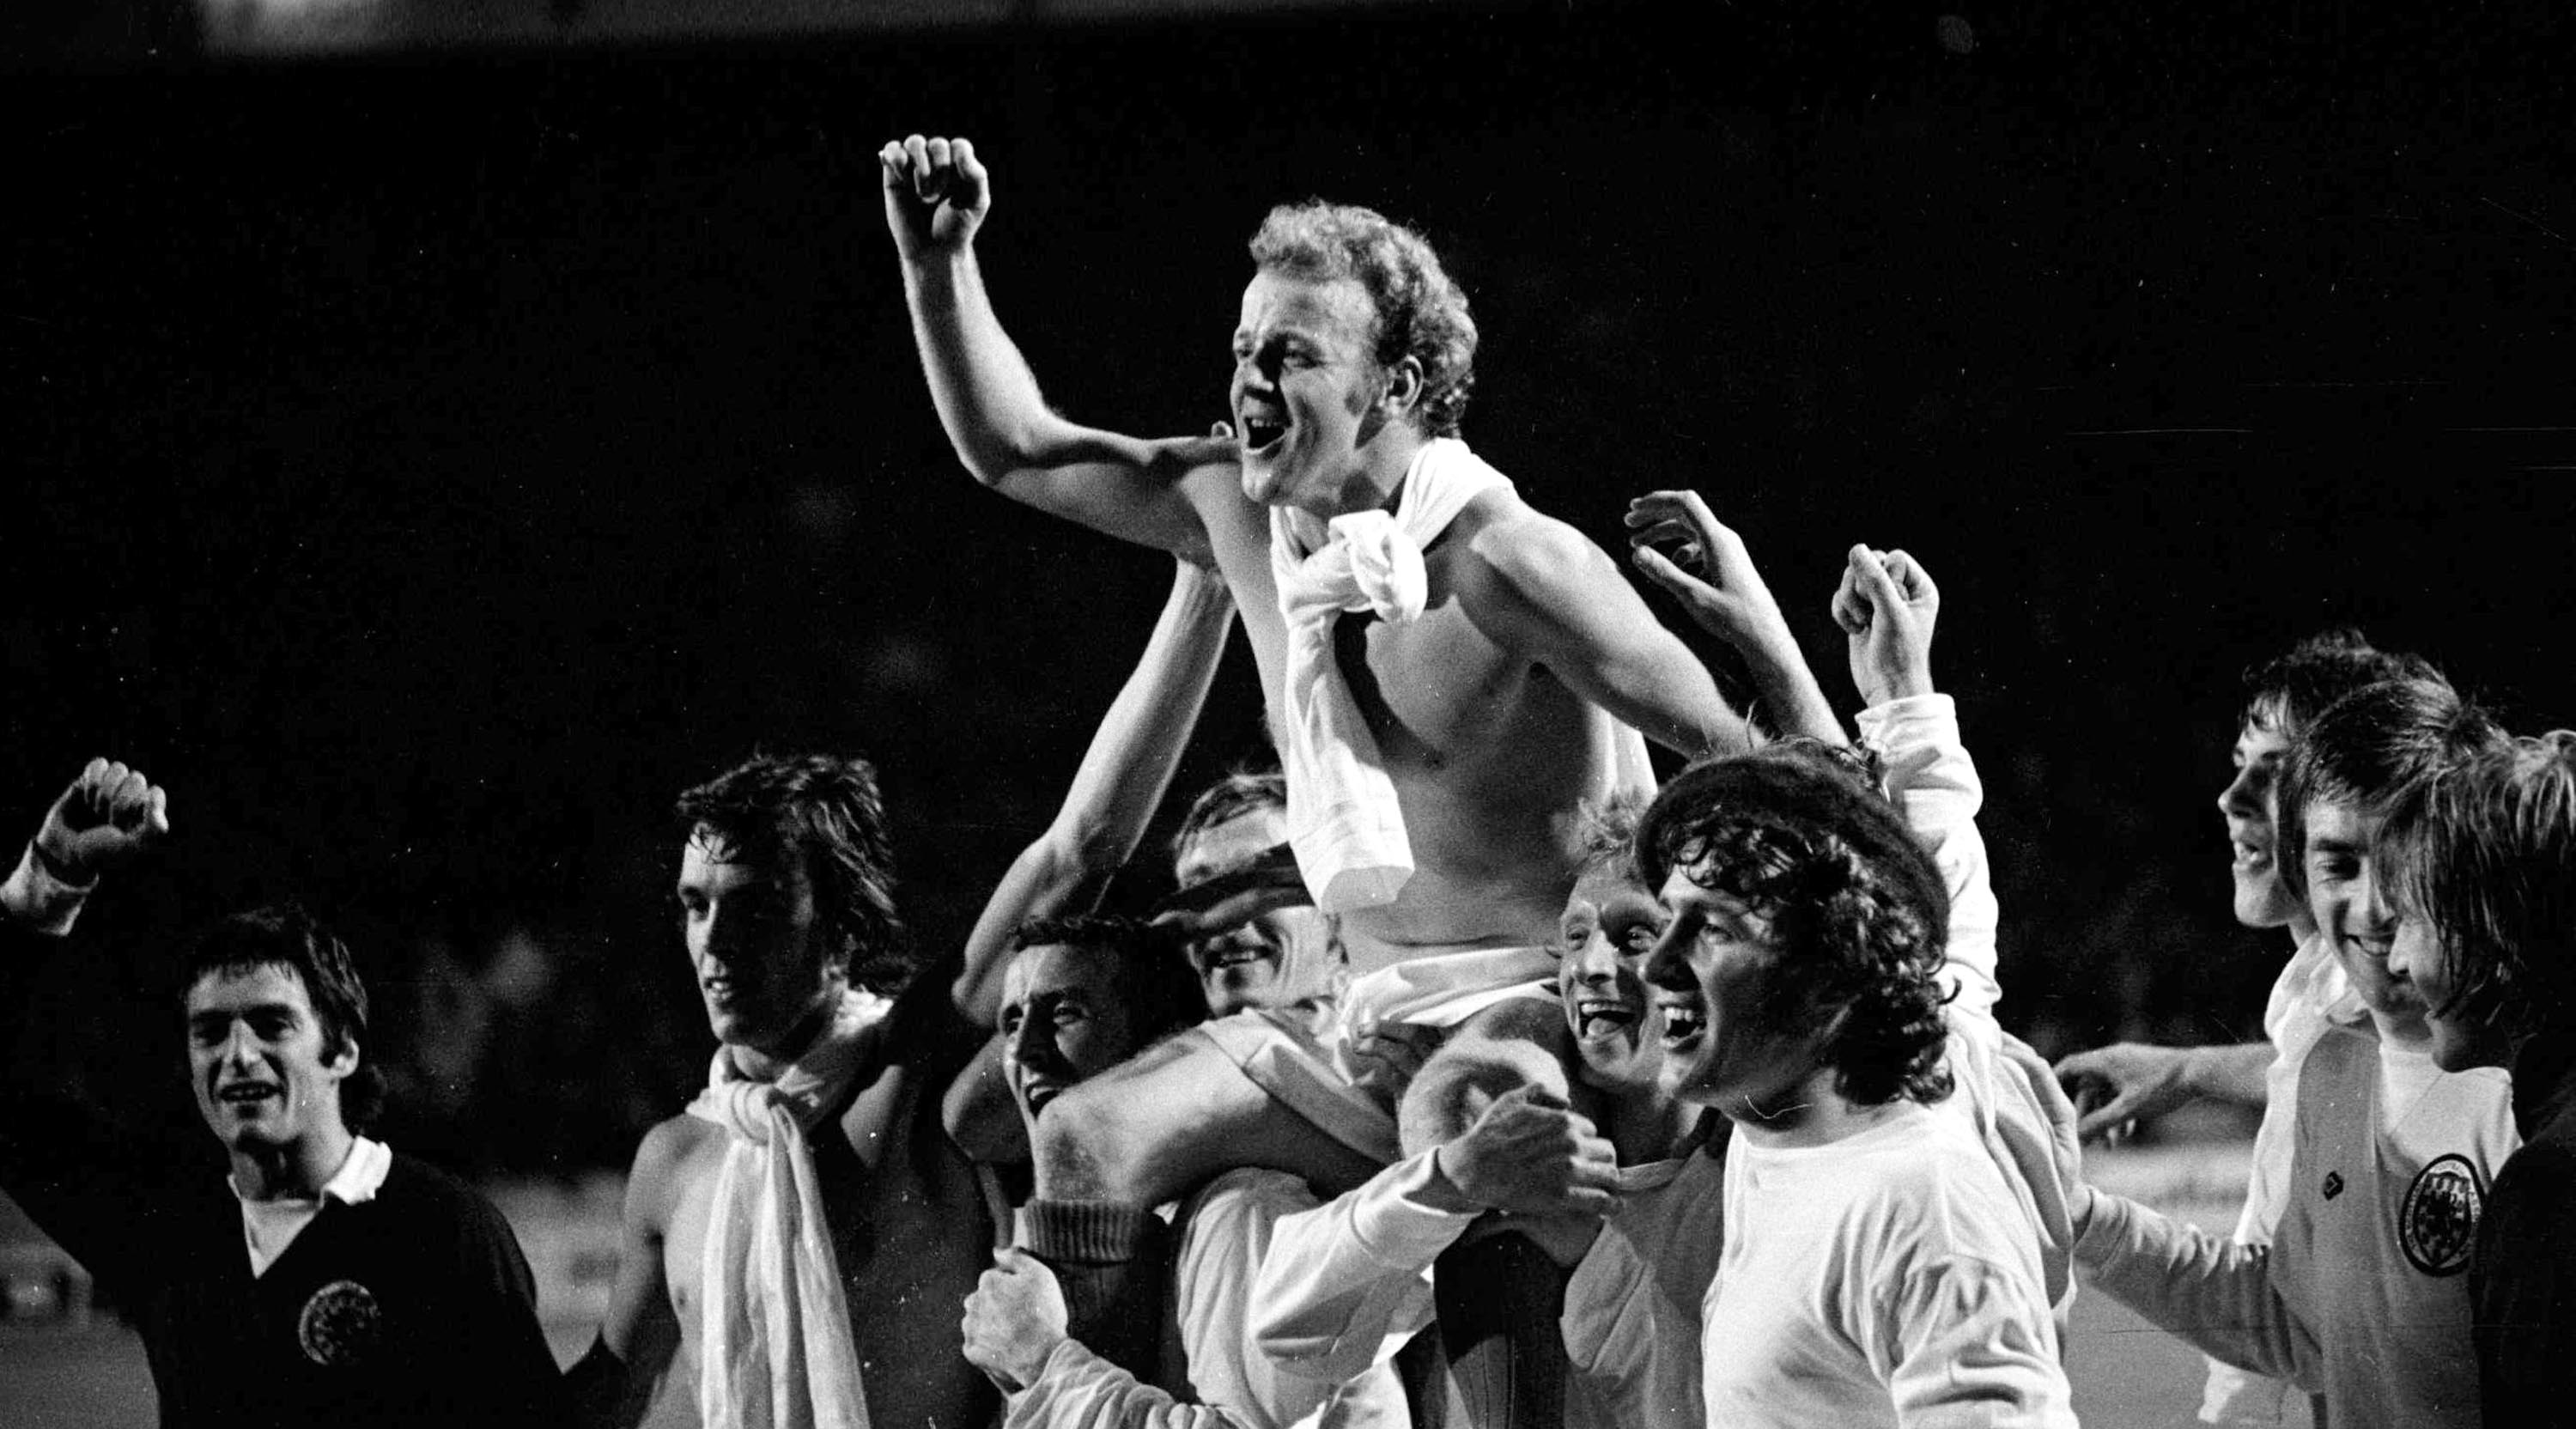 Scotland captain Billy Bremner is carried shoulder high after Scotland had beaten the Czechs in September, 1973, to qualify for the World Cup Finals